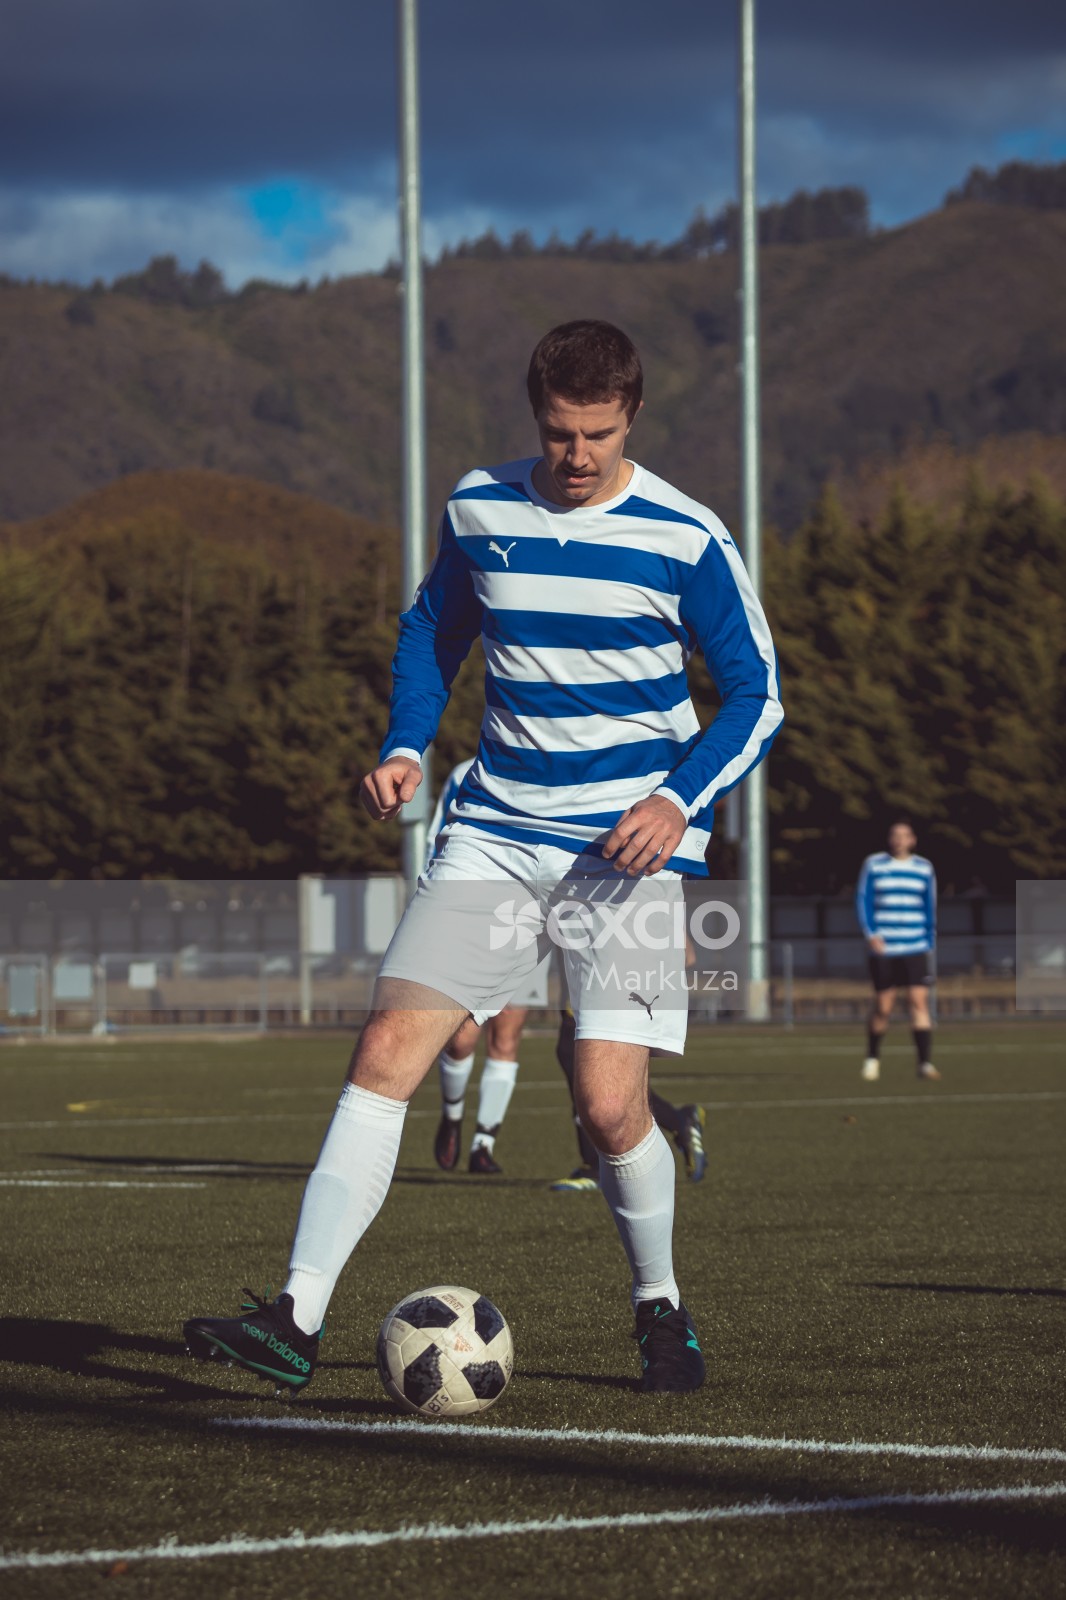 Player in a blue and white striped Puma shirt - Sports Zone sunday league